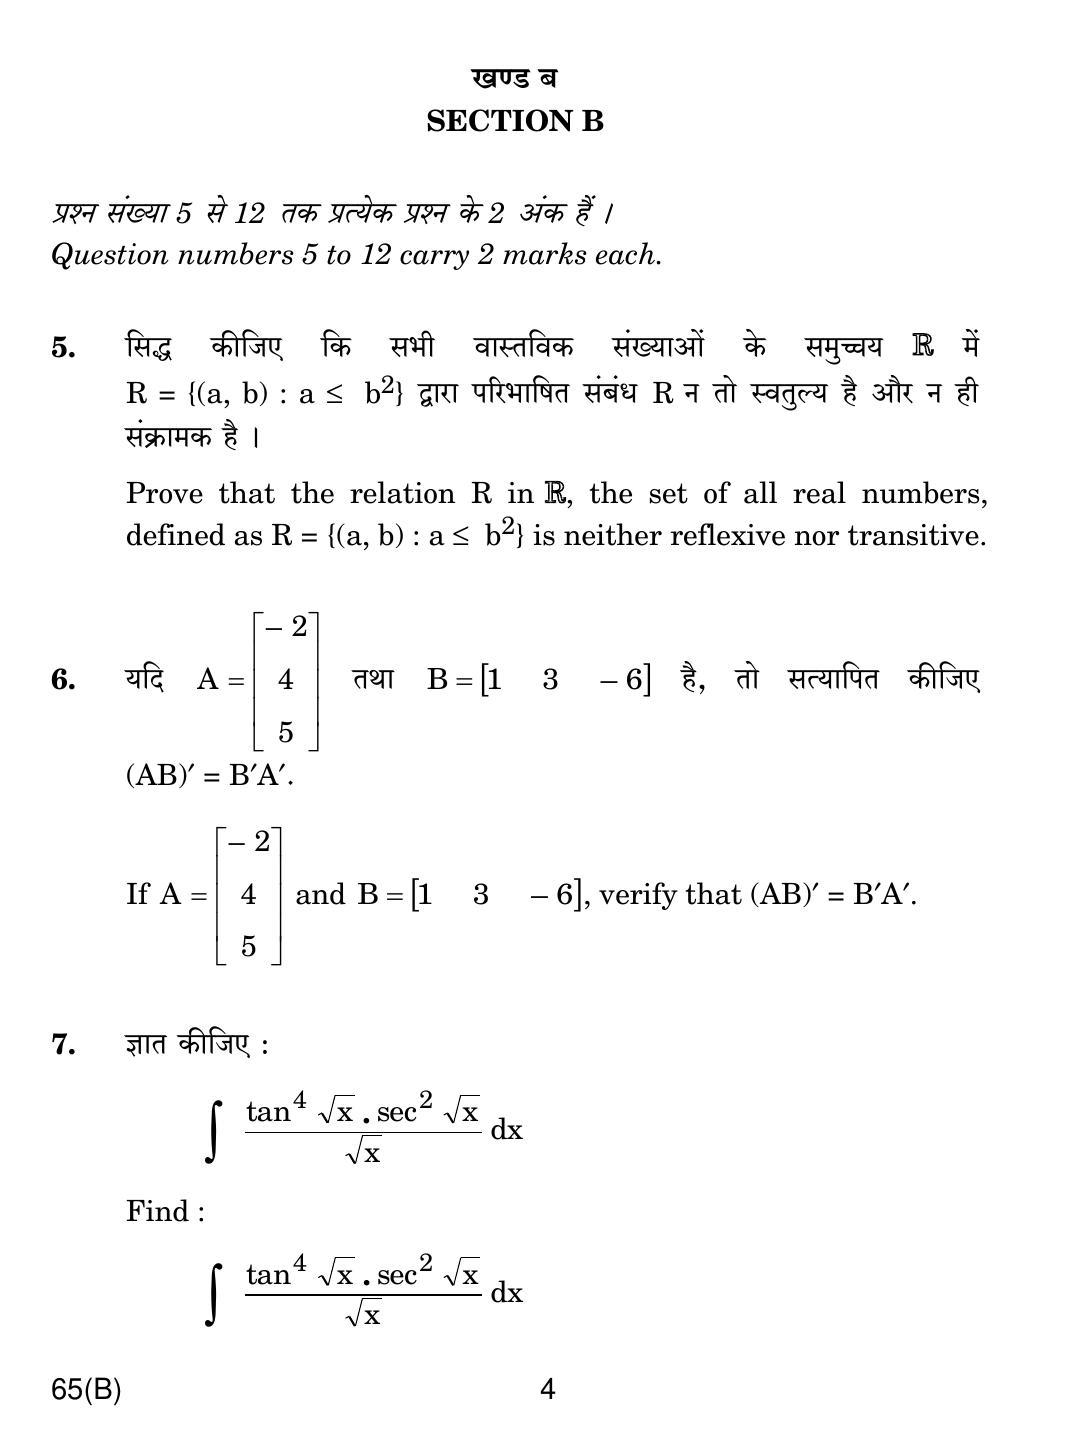 CBSE Class 12 65(B) MATHS For Blind Candidates 2019 Compartment Question Paper - Page 4